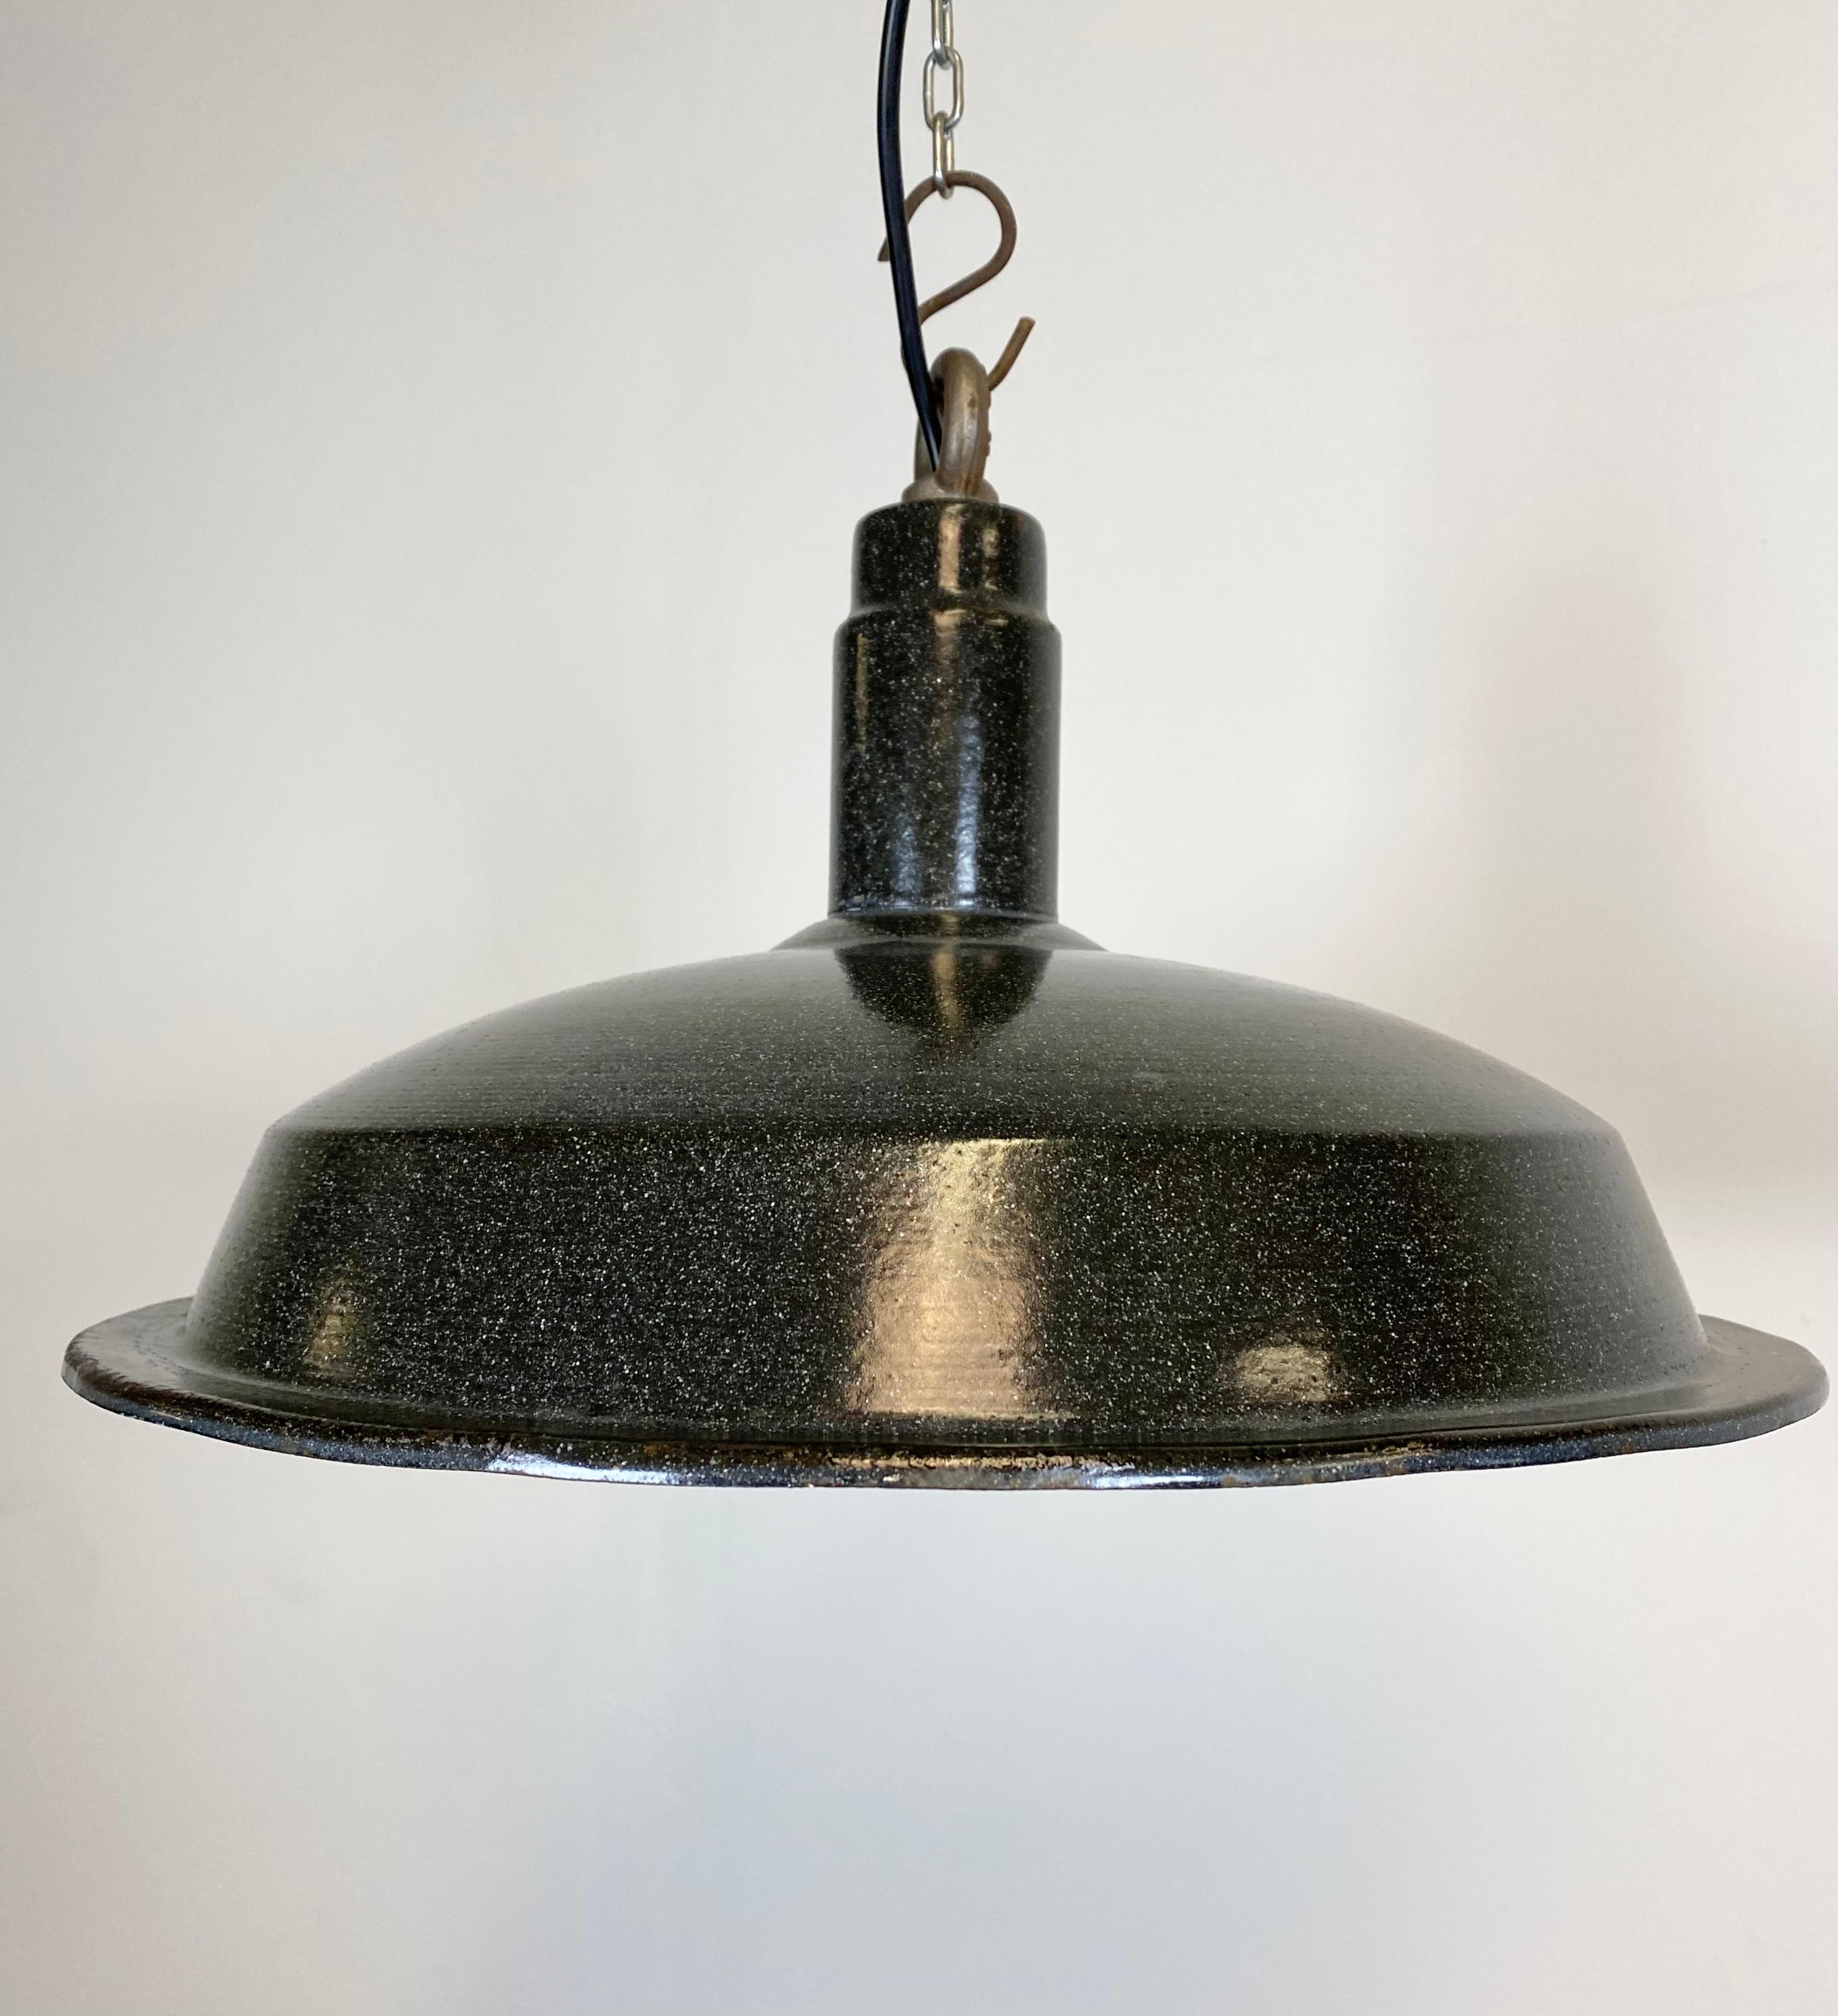 Industrial hanging light made in the 1950s. Dark grey enamel. White interior. Iron top. New porcelain socket for E 27 lightbulbs and wire. Weight: 2 kg. Measure: Diameter 42 cm.